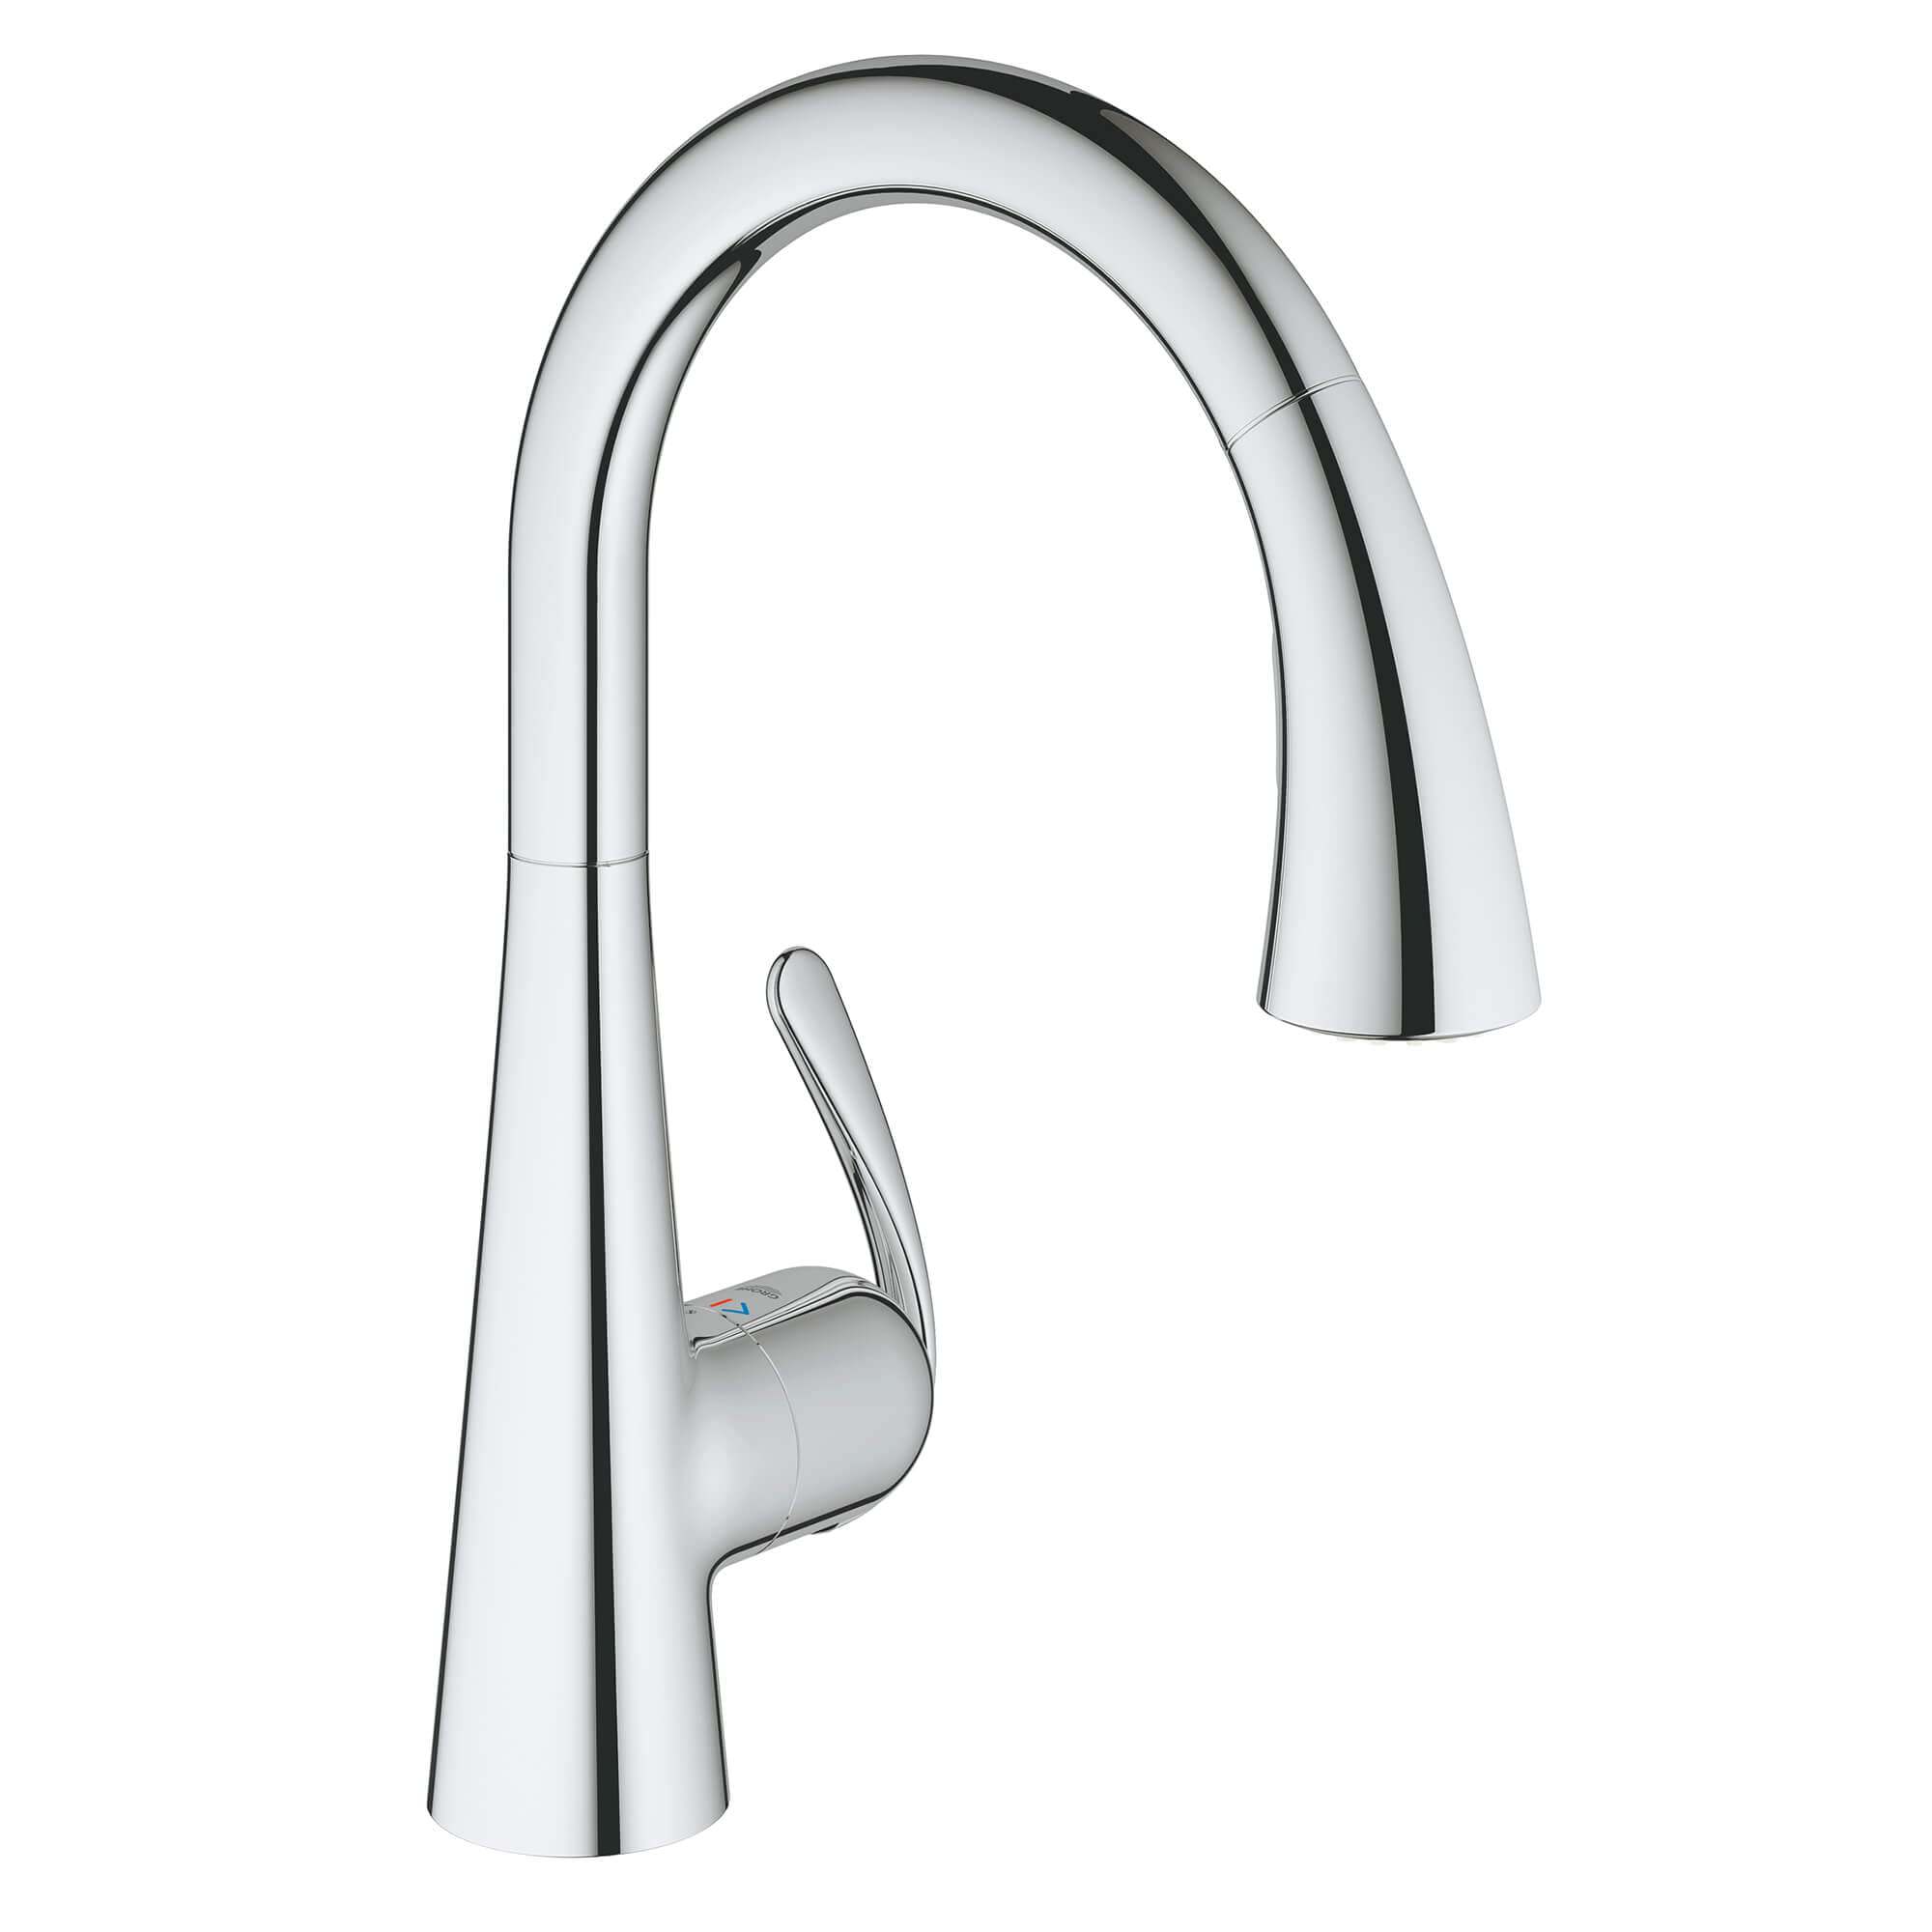 TOUCHLESS FOOTCONTROL SINGLE-HANDLE PULL DOWN KITCHEN FAUCET DUAL SPRAY 1.75 GPM Model: 30313000-related